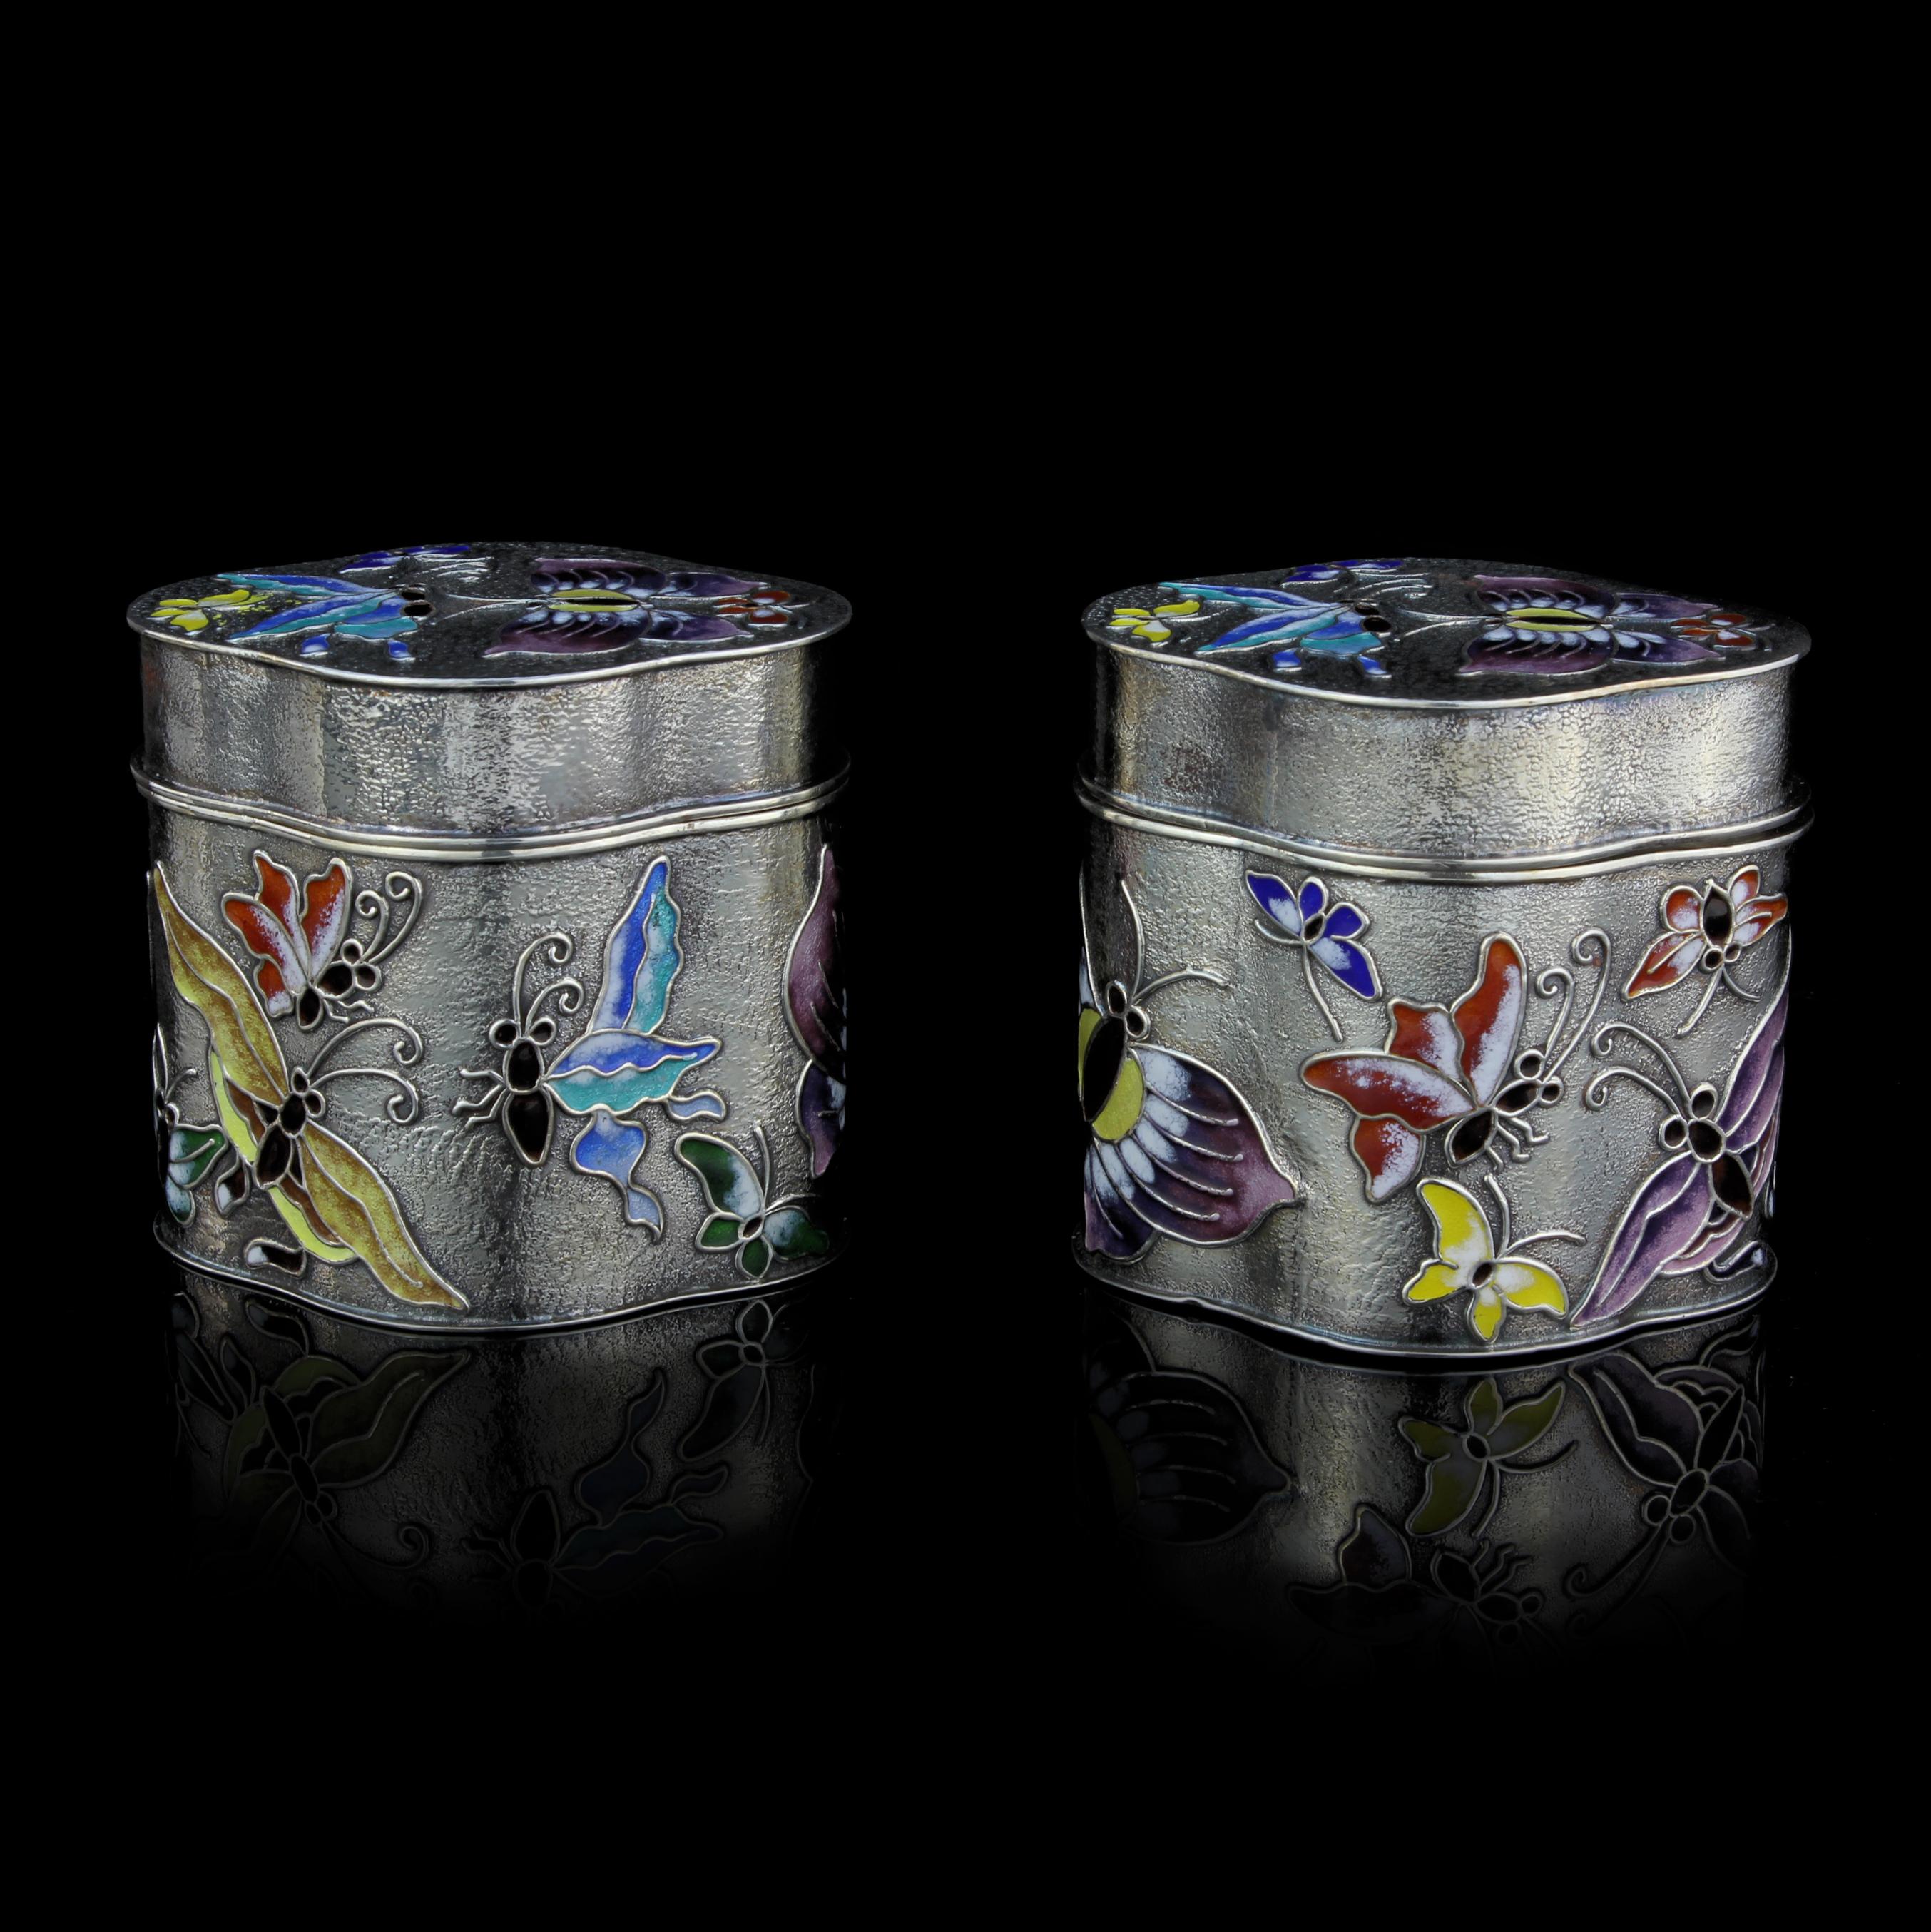 Antique 20th century Korean 99. Silver pair of tea caddies with enamelled butterflies 

Made in Korea, 20th century 
Hallmarked to base silver 99. 

Approx dimensions: 
Size: 6.8 x 5.6 x 6.2 cm 
Total weight: 300 grams

Condition: General